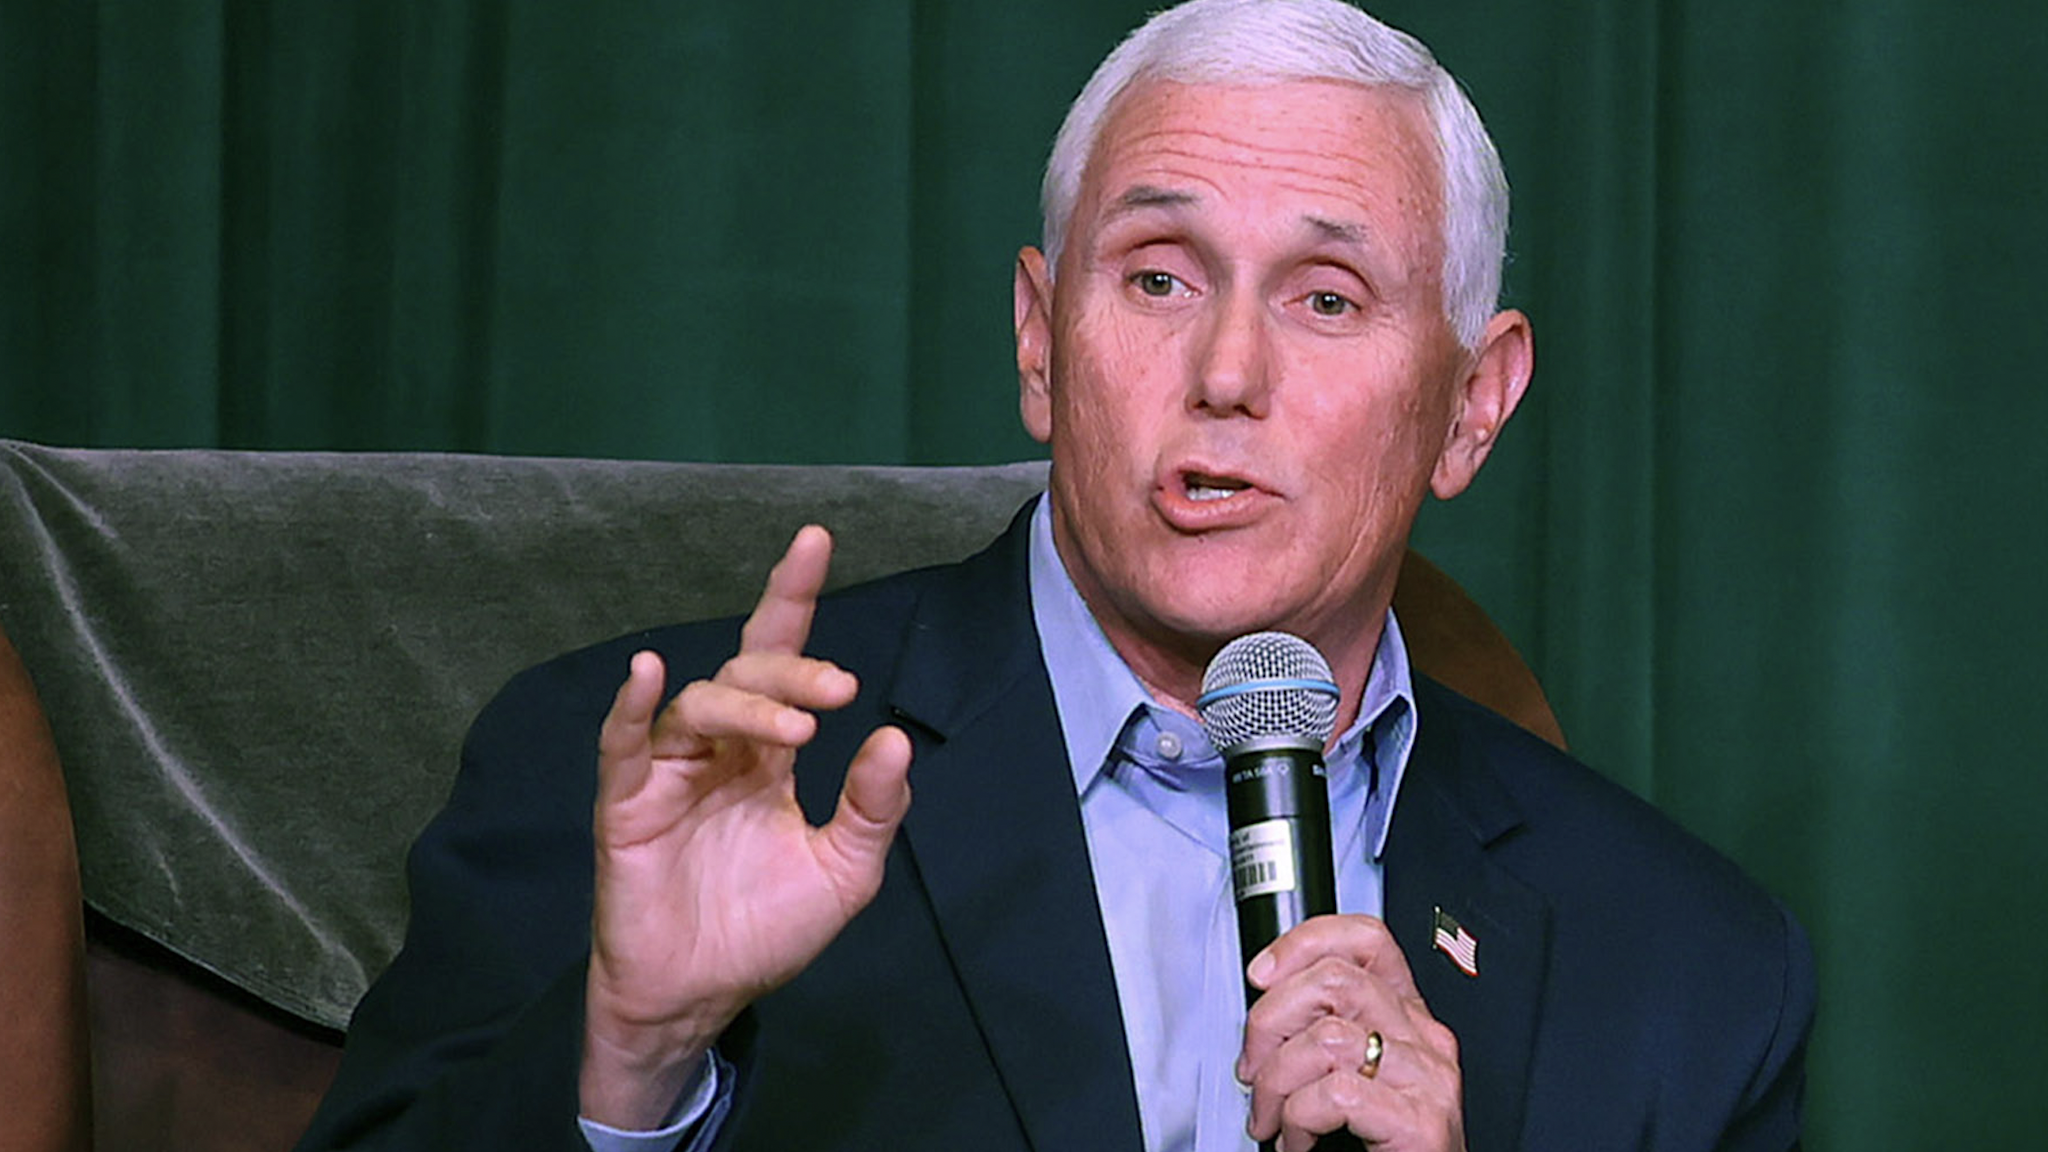 Former Vice President Mike Pence speaks during a fireside chat at the Ezell Recreation Center at The Villages on Jan. 10, 2023. Pence was at The Villages for a book signing event for his recently published book